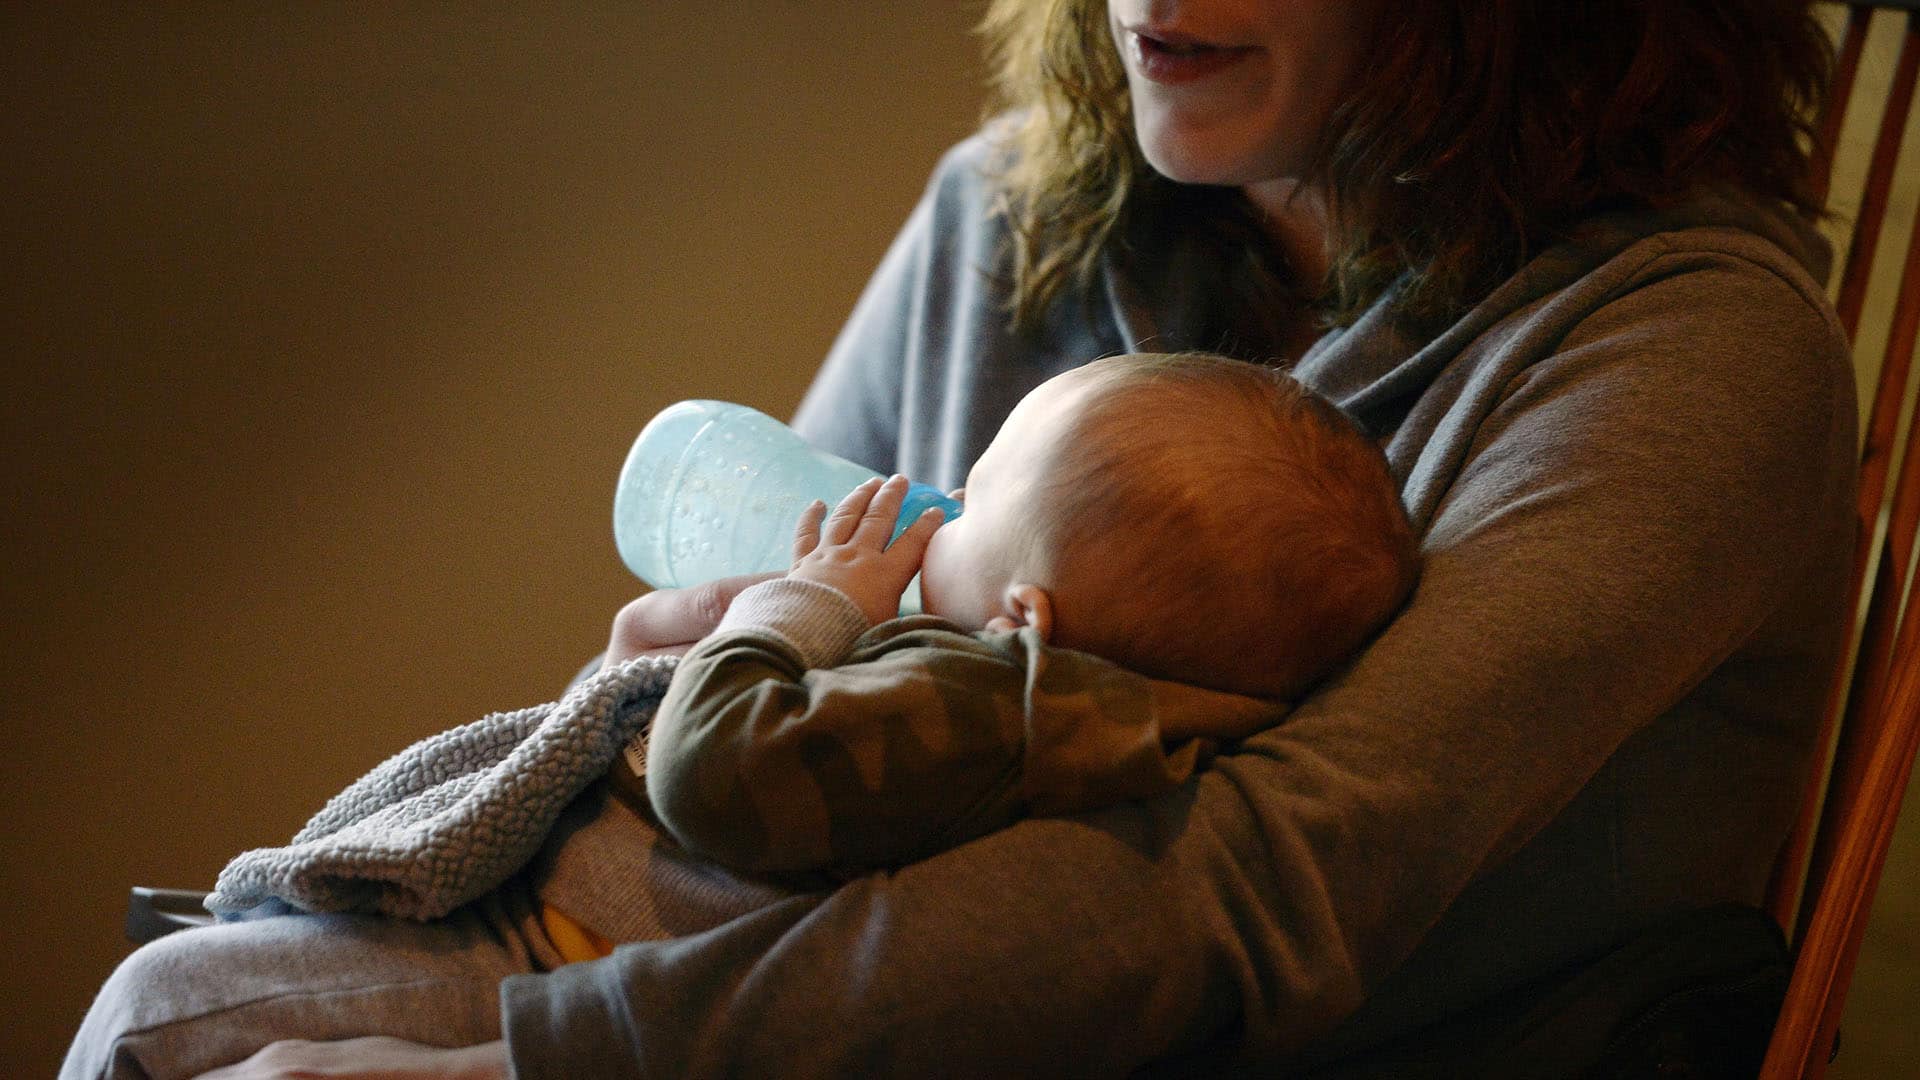 A mother feeds her four-month-old son, who was exposed to opiates in the womb, at the Woman's Pavilion of St. Mary's Hospital in Lewiston, Maine in 2016.